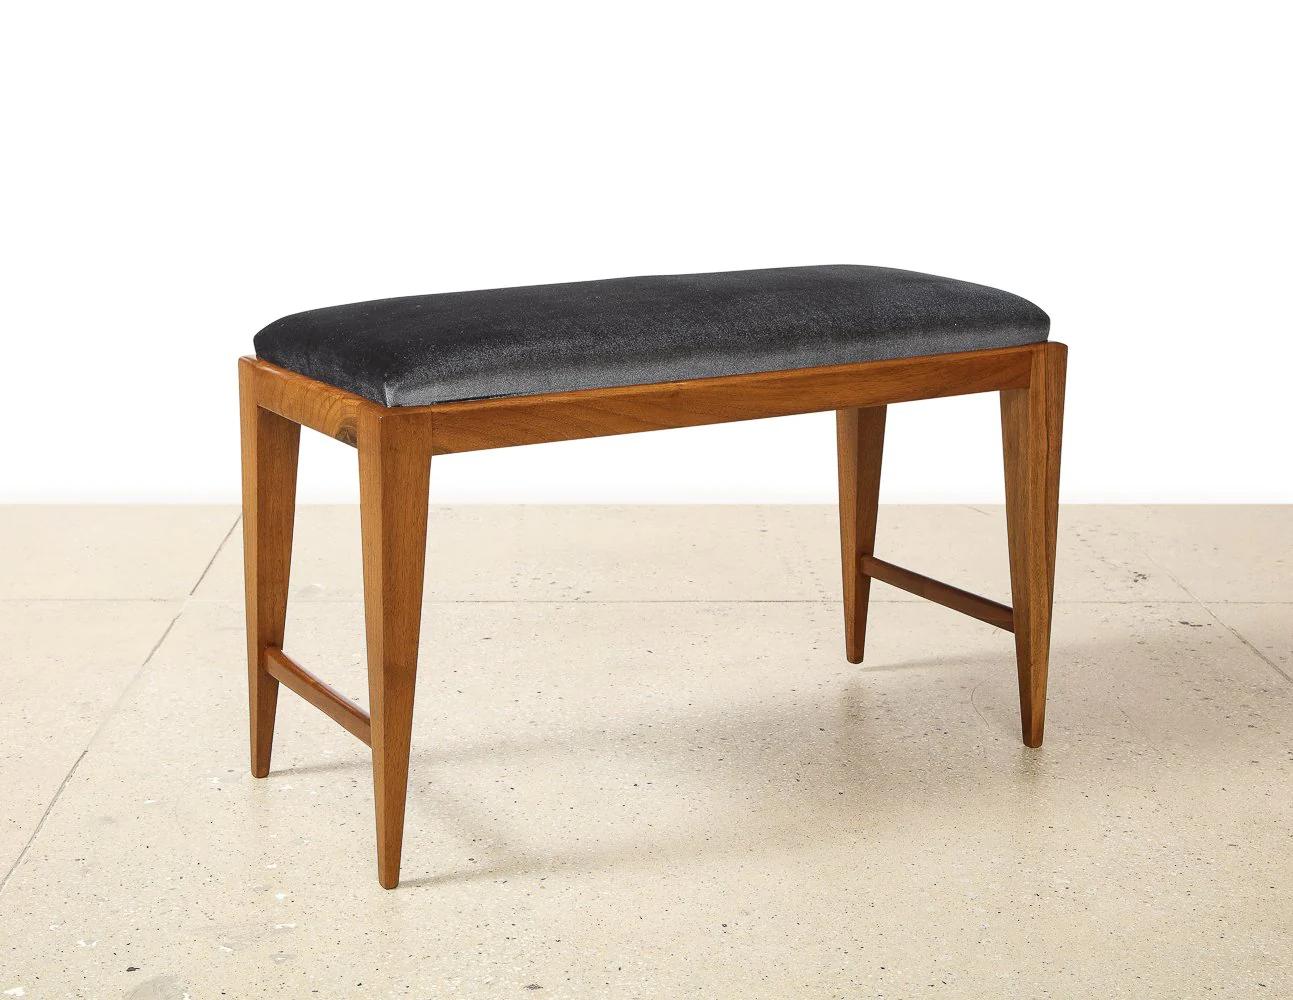 Italian Upholstered Bench Attributed to Gio Ponti